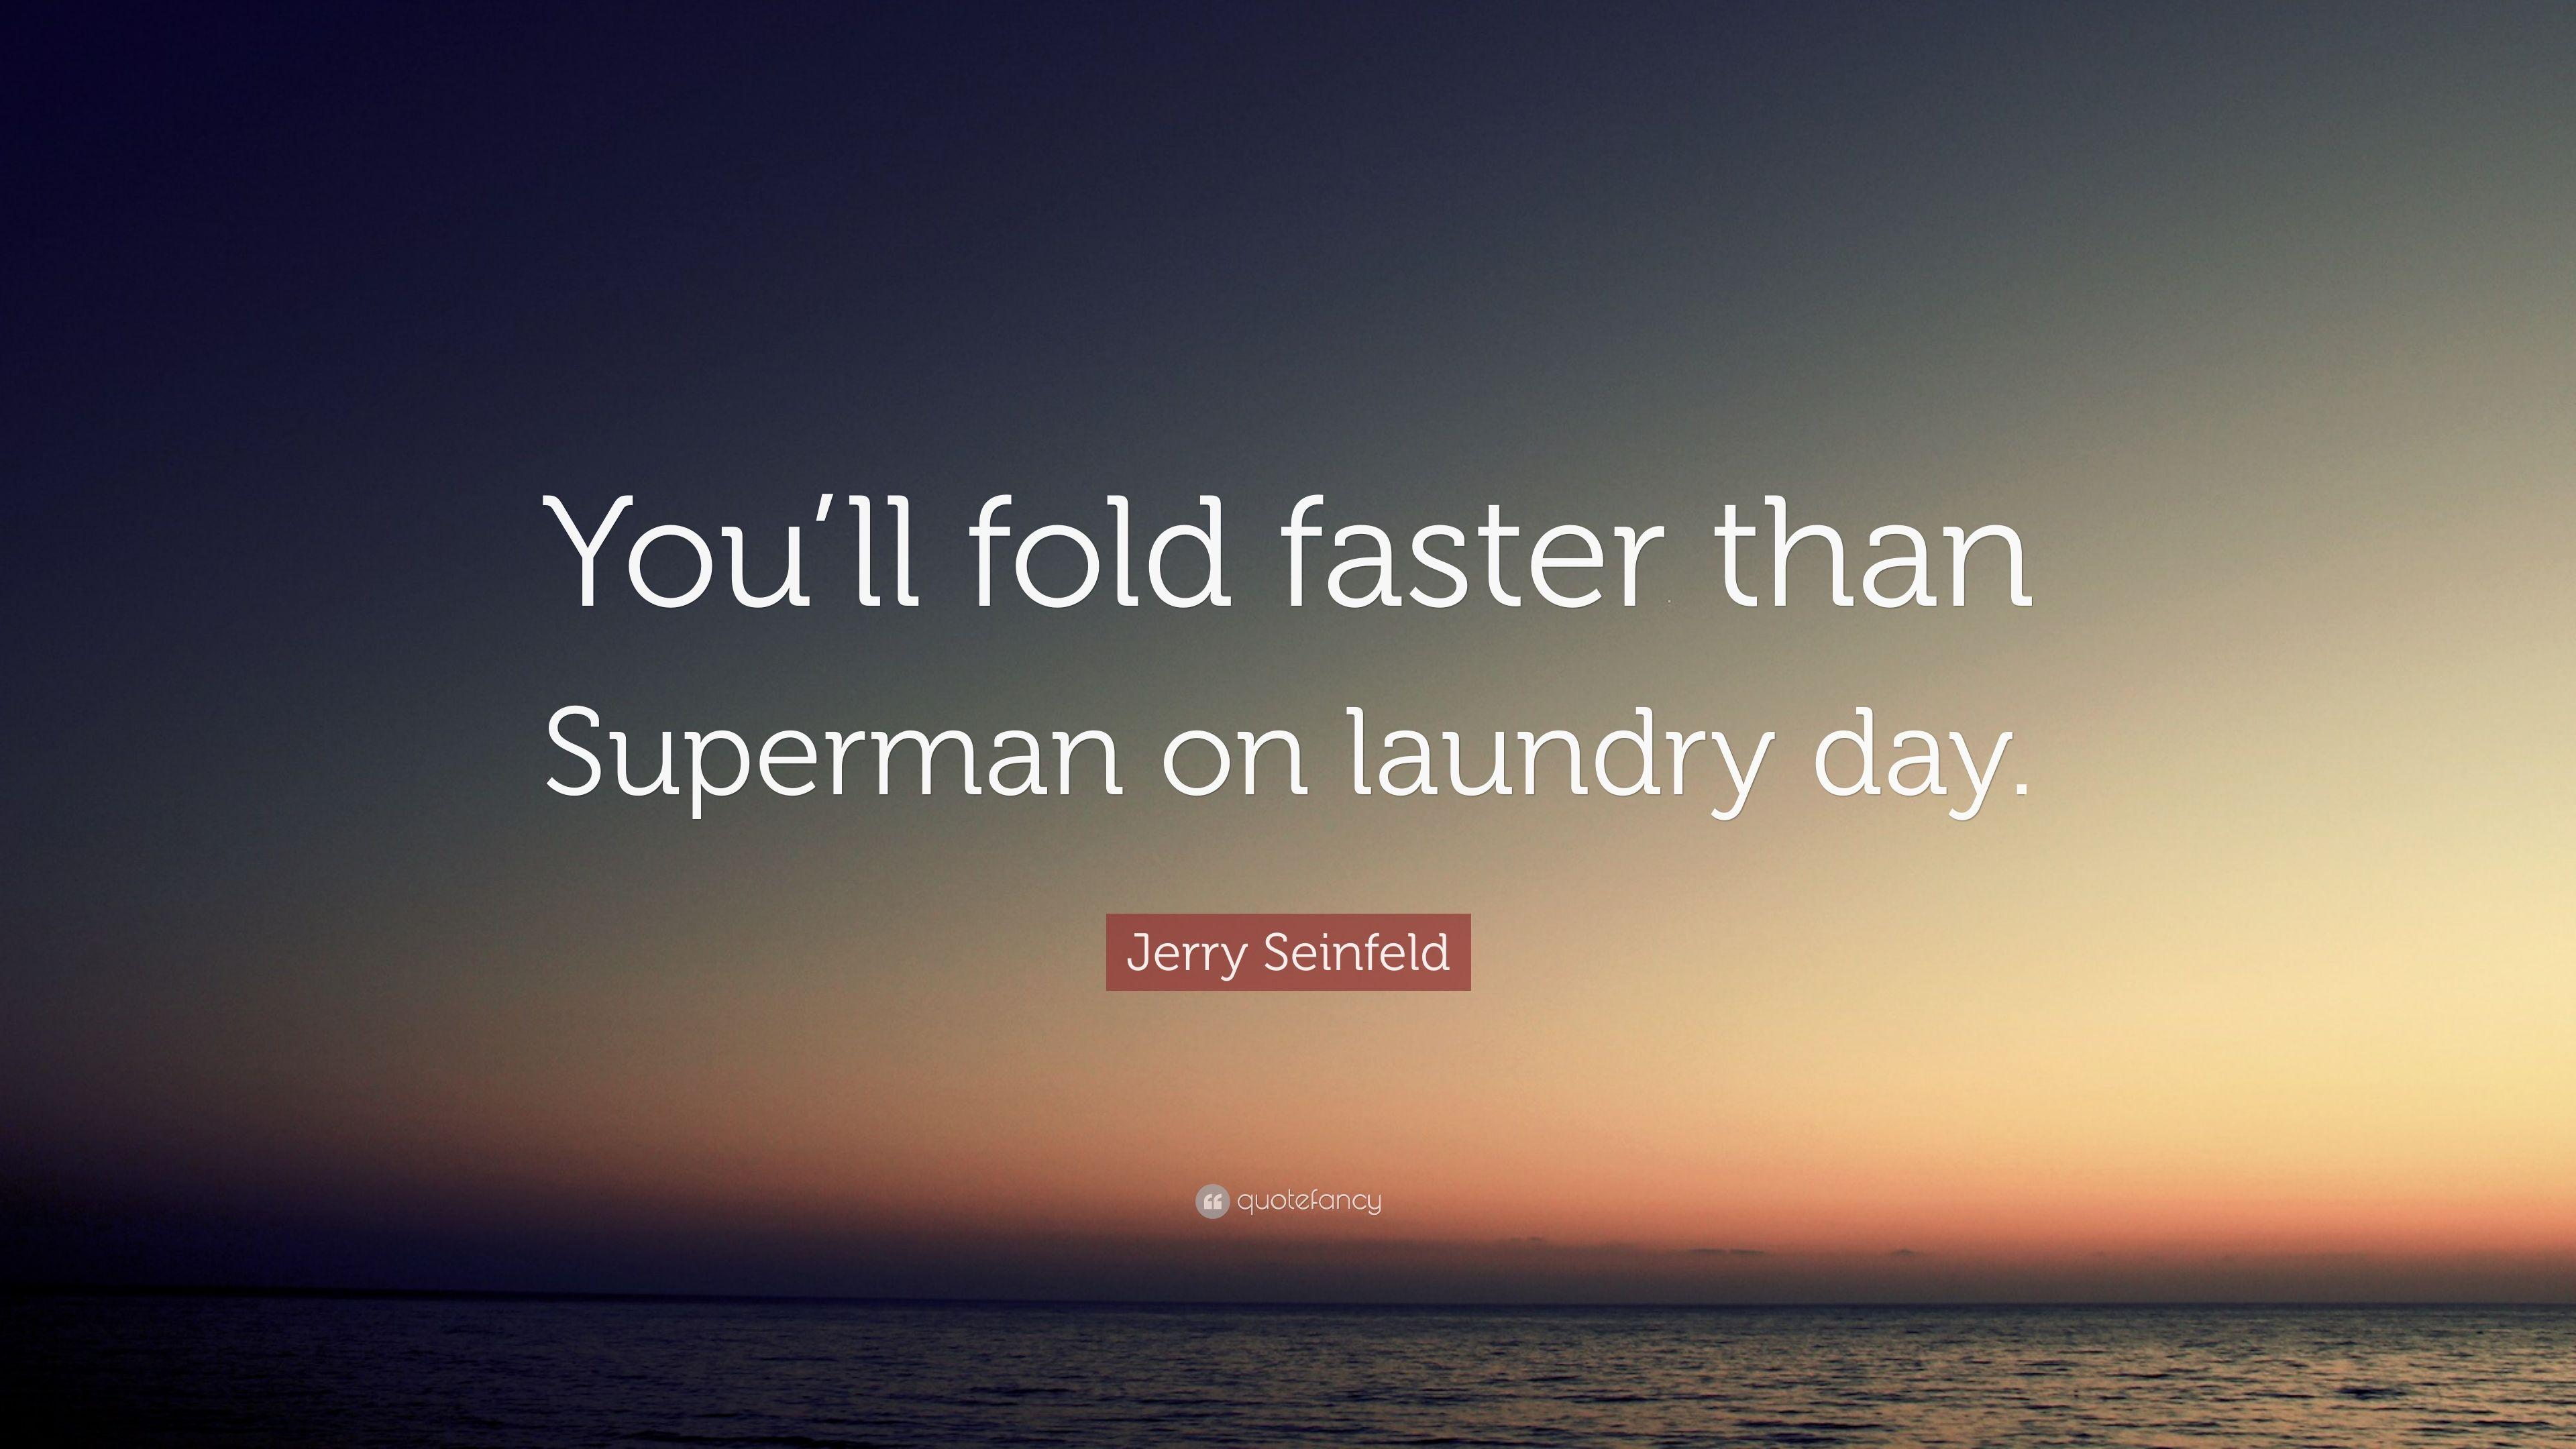 Jerry Seinfeld Quote: “You'll fold faster than Superman on laundry